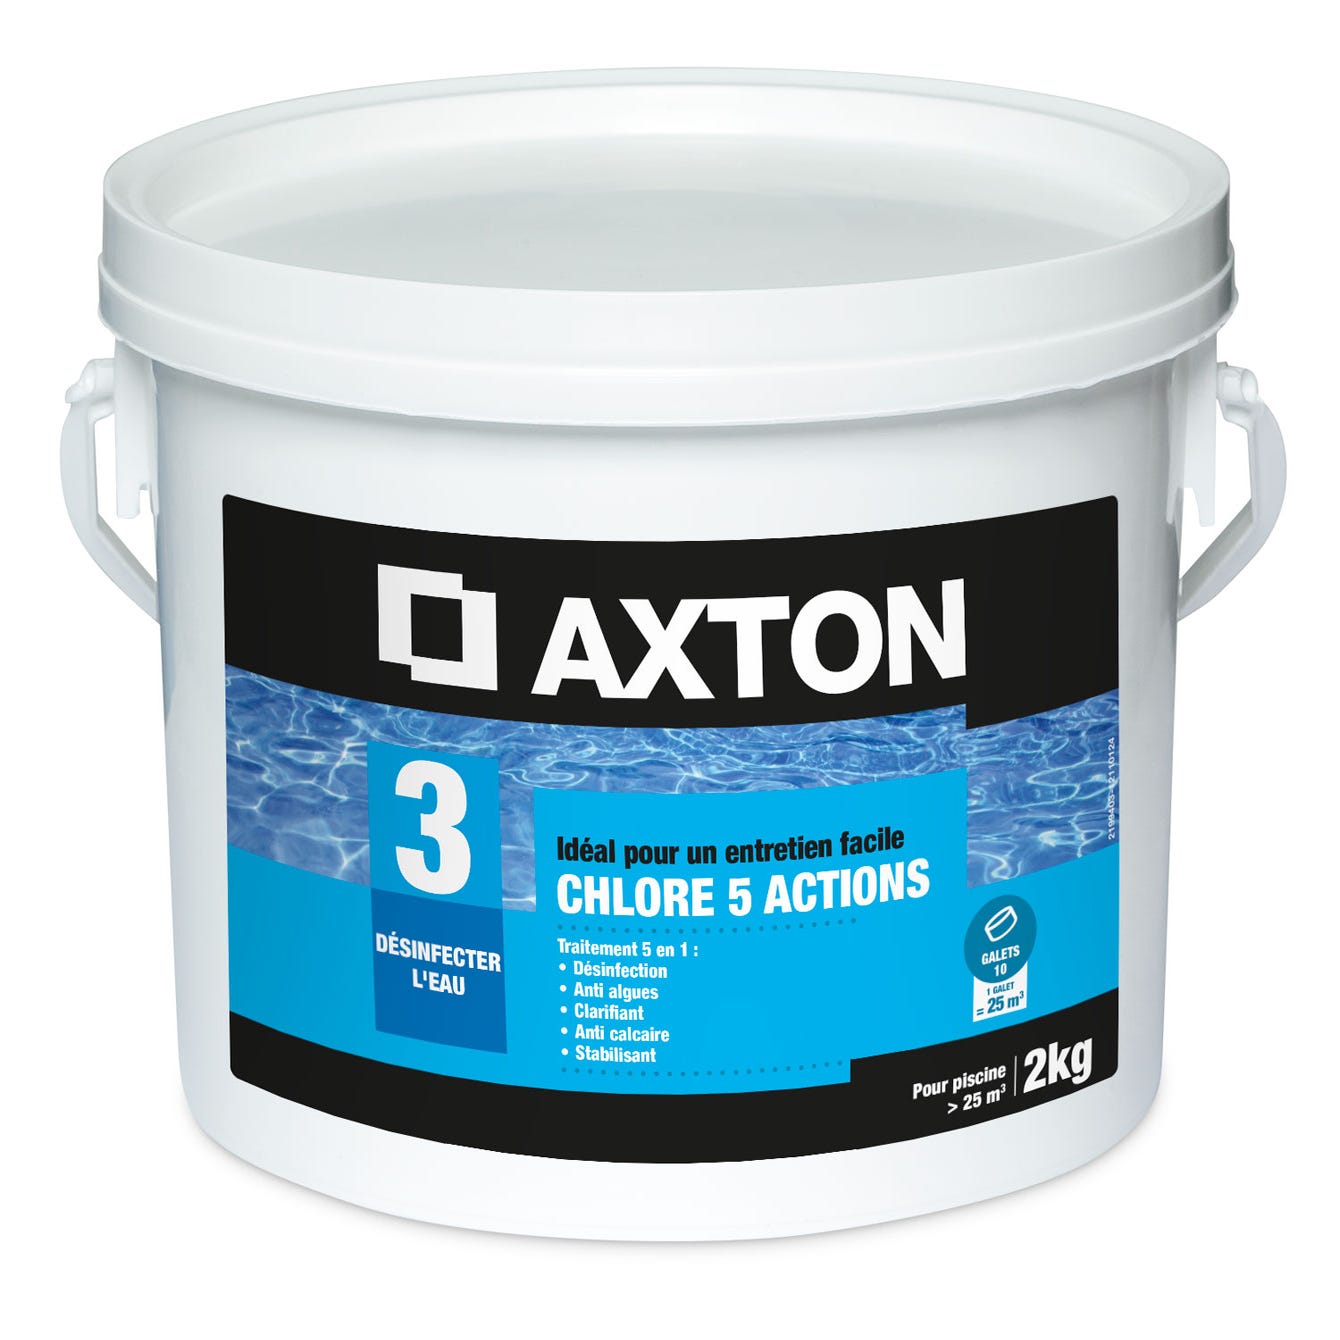 Chlore 5 actions galets 200 g AXTON, 10 kg